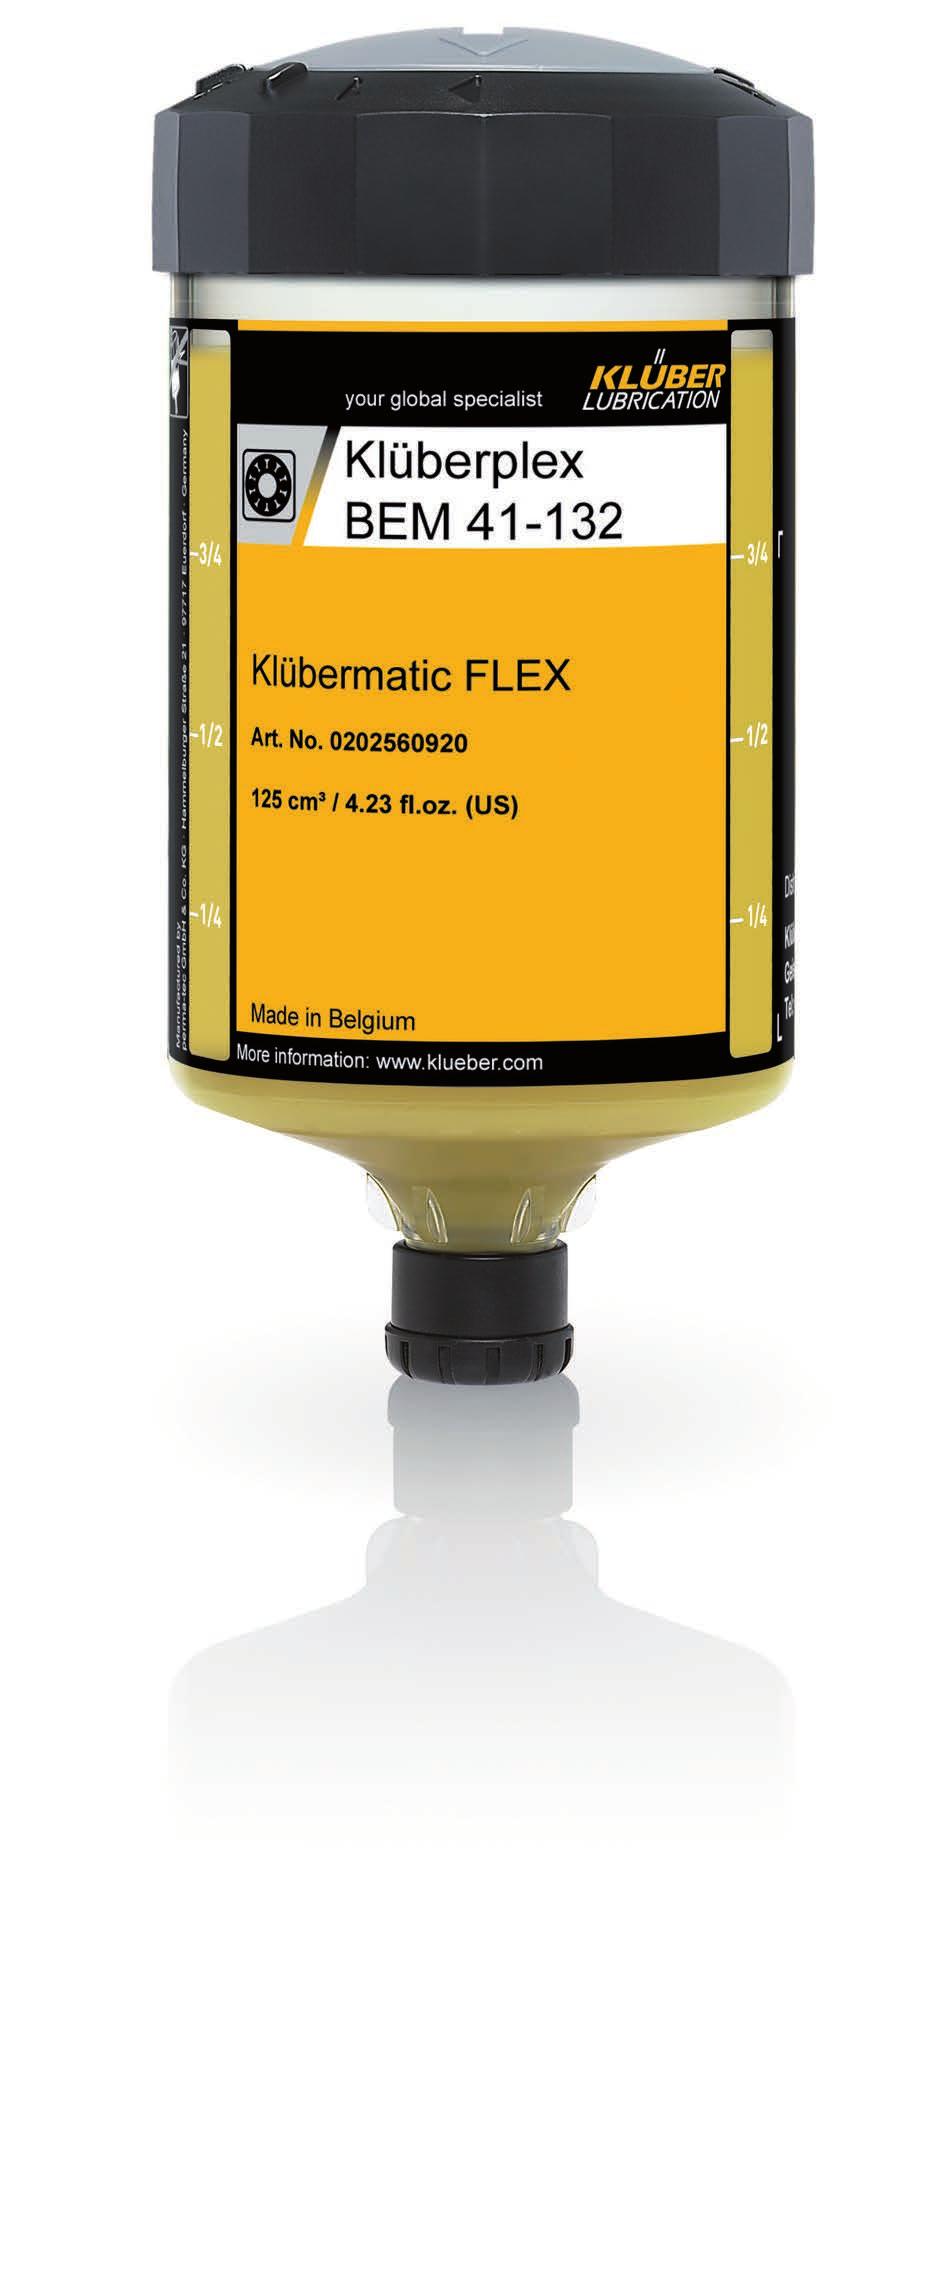 Klübermatic FLEX The compact and fl exible lubrication unit Flexible for use in demanding applications Klübermatic FLEX is a compact, ready-to-use lubricator.